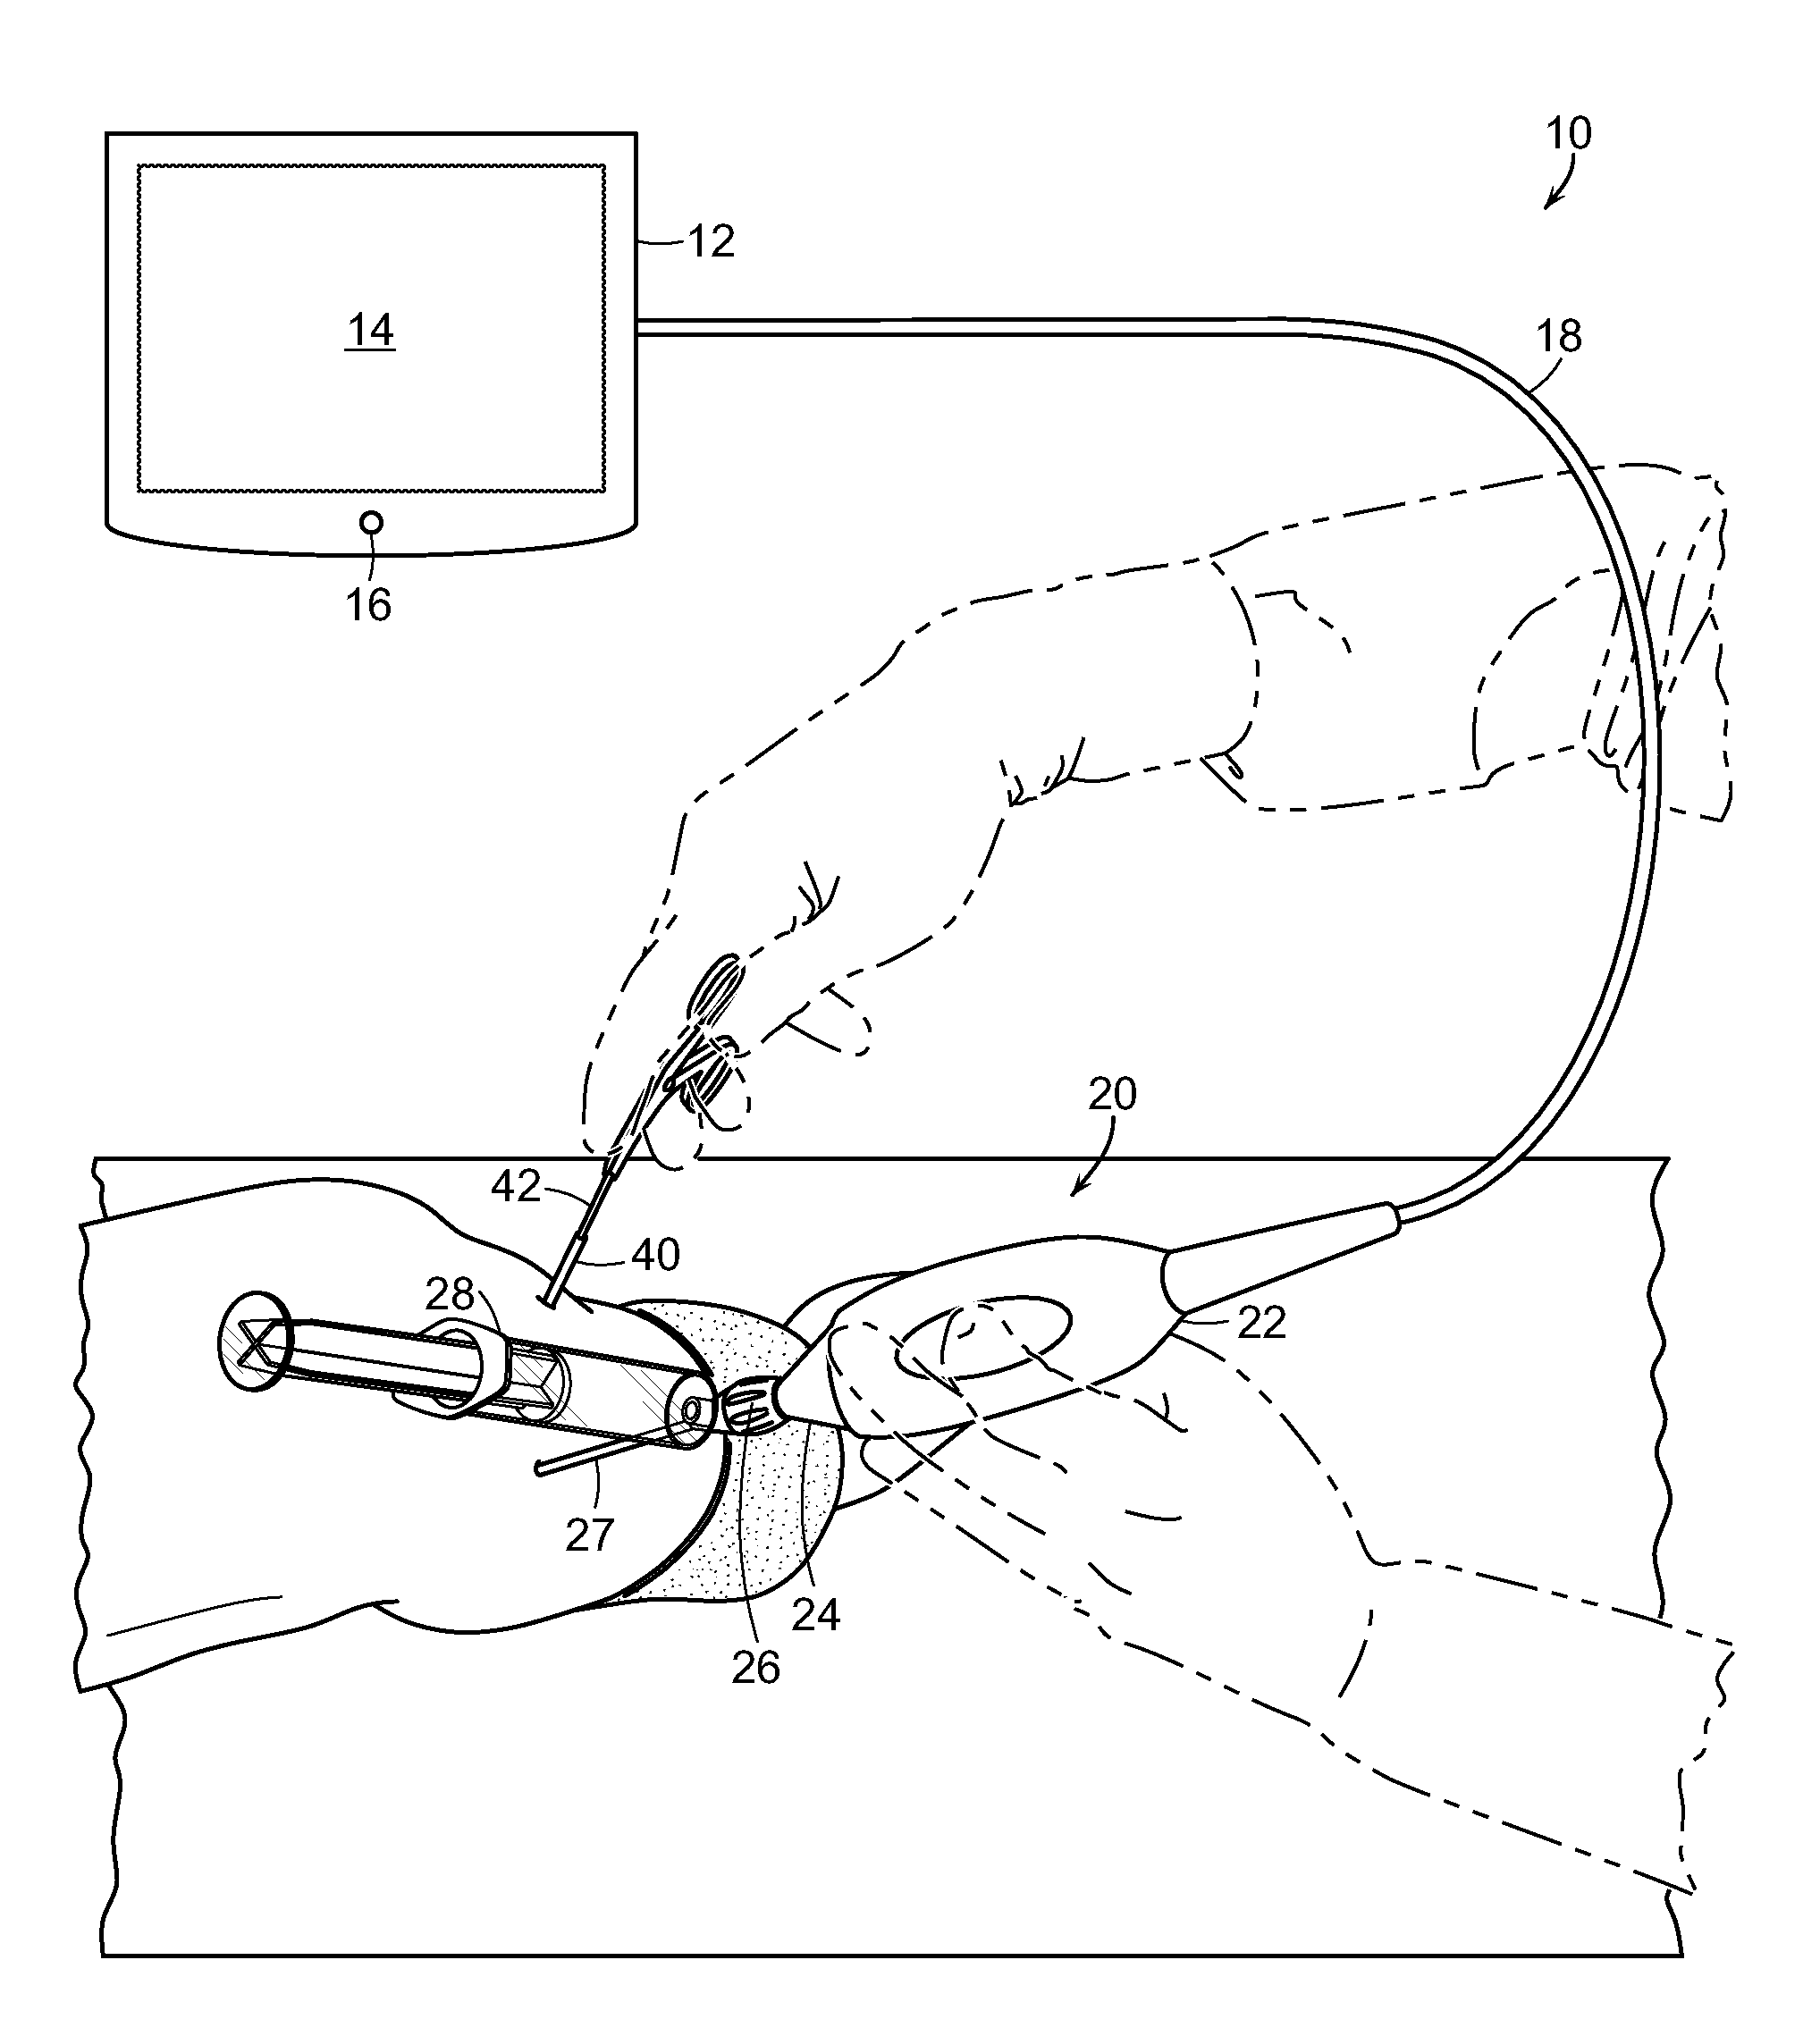 Devices and methods for minimally invasive arthroscopic surgery